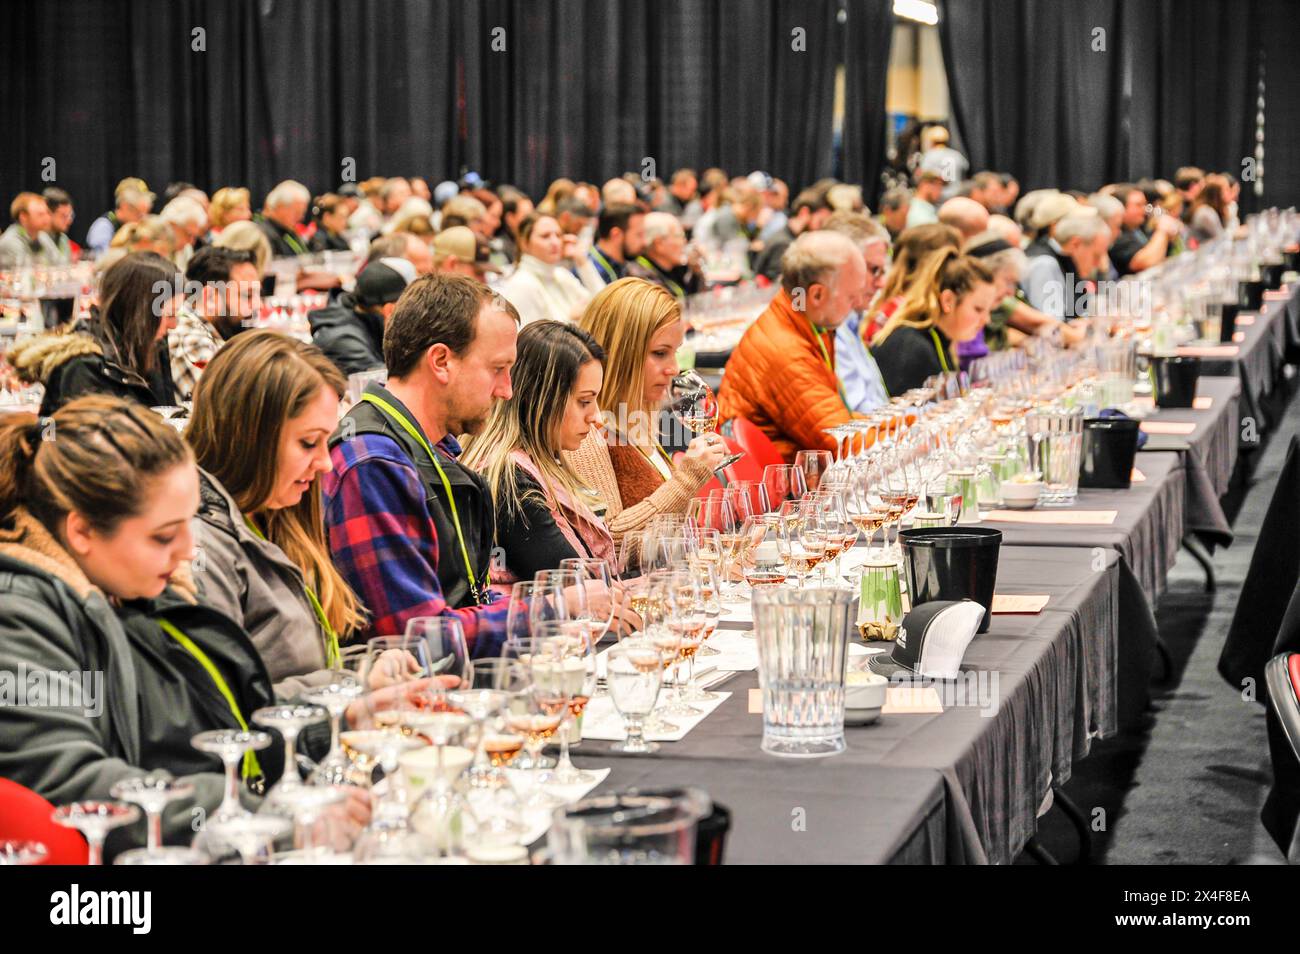 USA, Washington State, Kennewick. Wine sampling finds a perfect venue at the Washington Winegrowers conference. (Editorial Use Only) Stock Photo